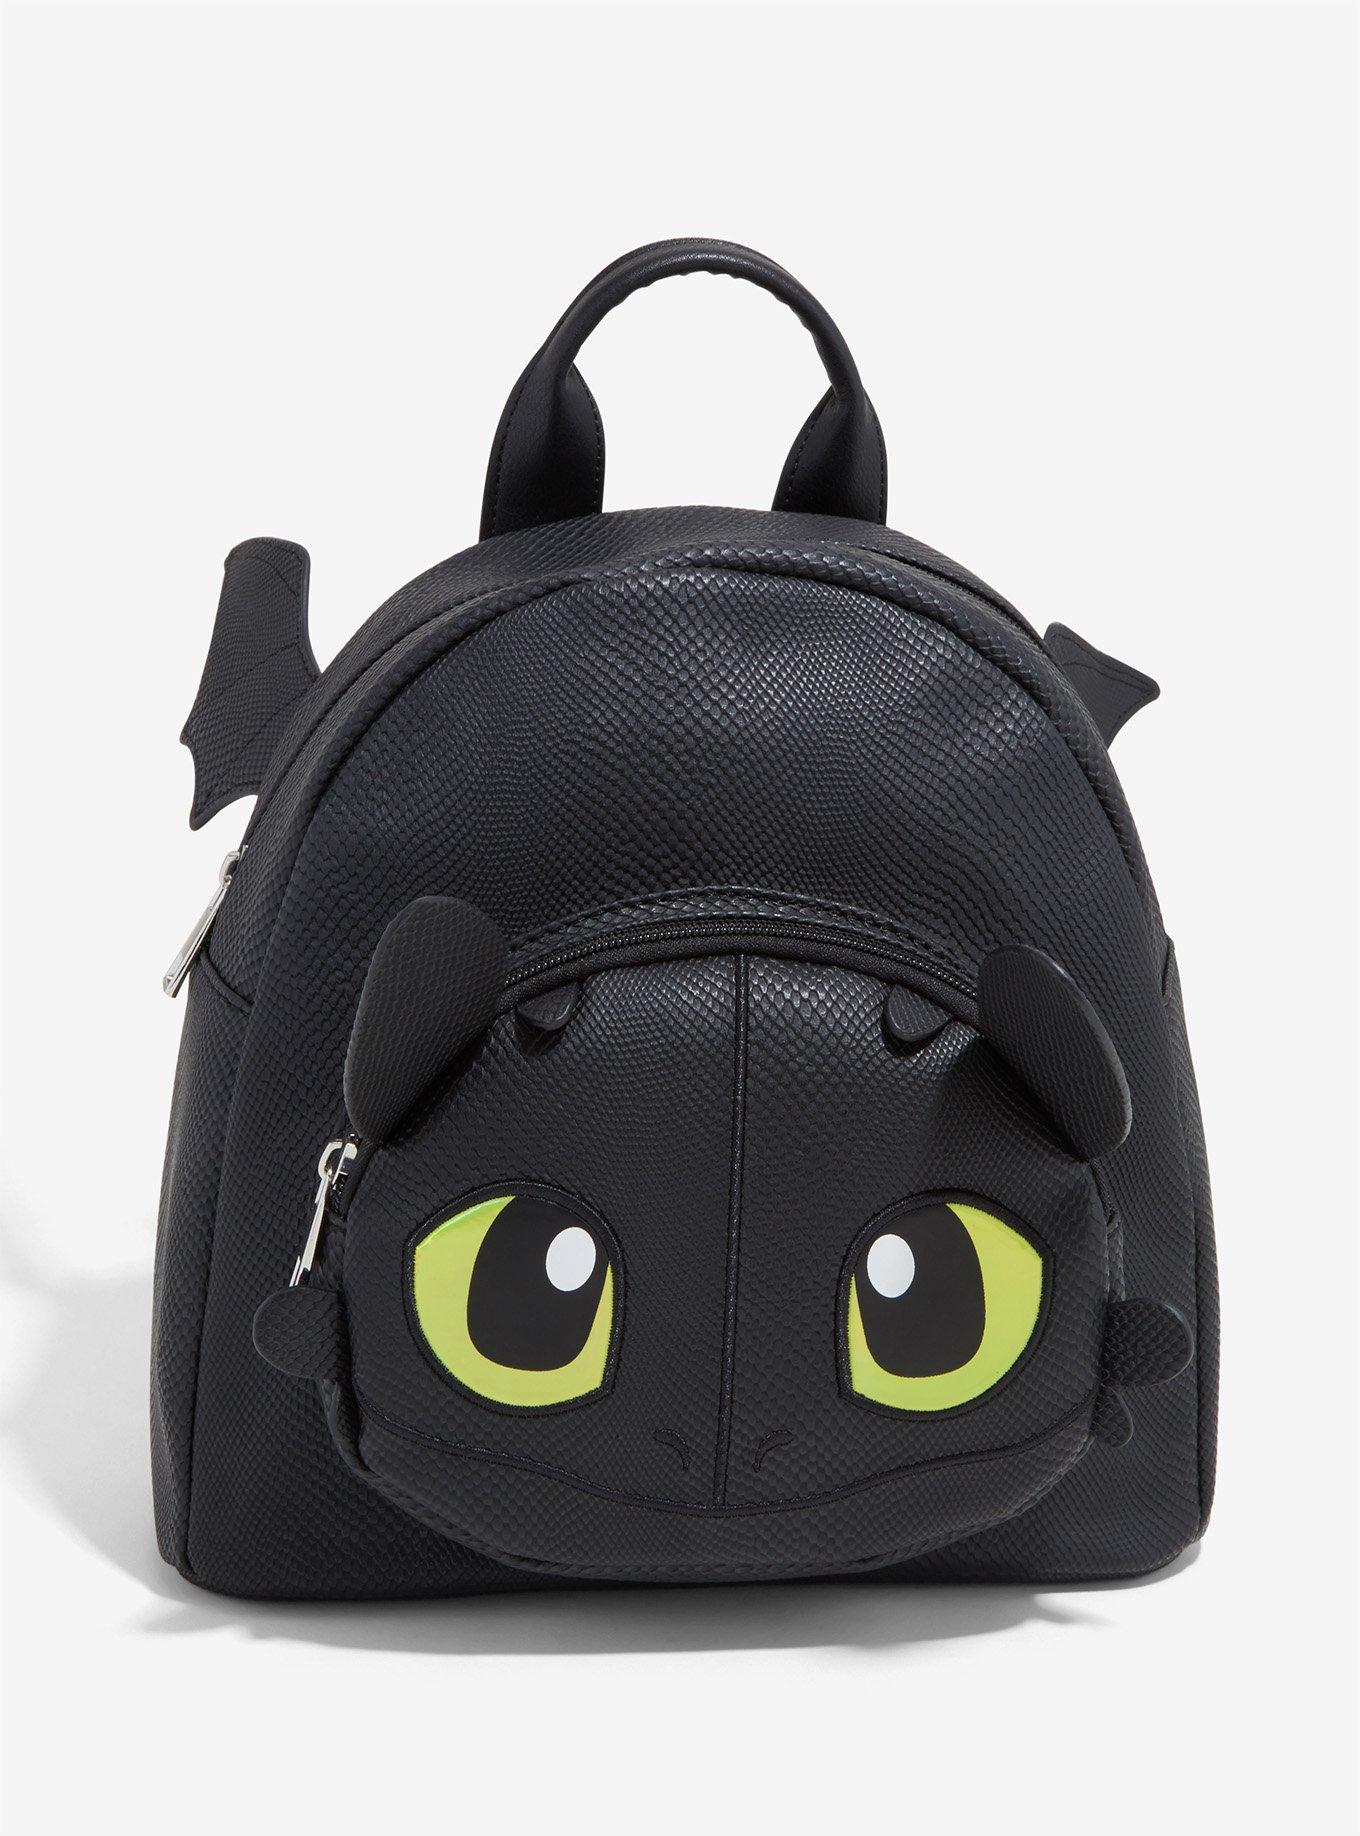 How To Train Your Dragon: The Hidden World Toothless Mini Wing Backpack, , alternate